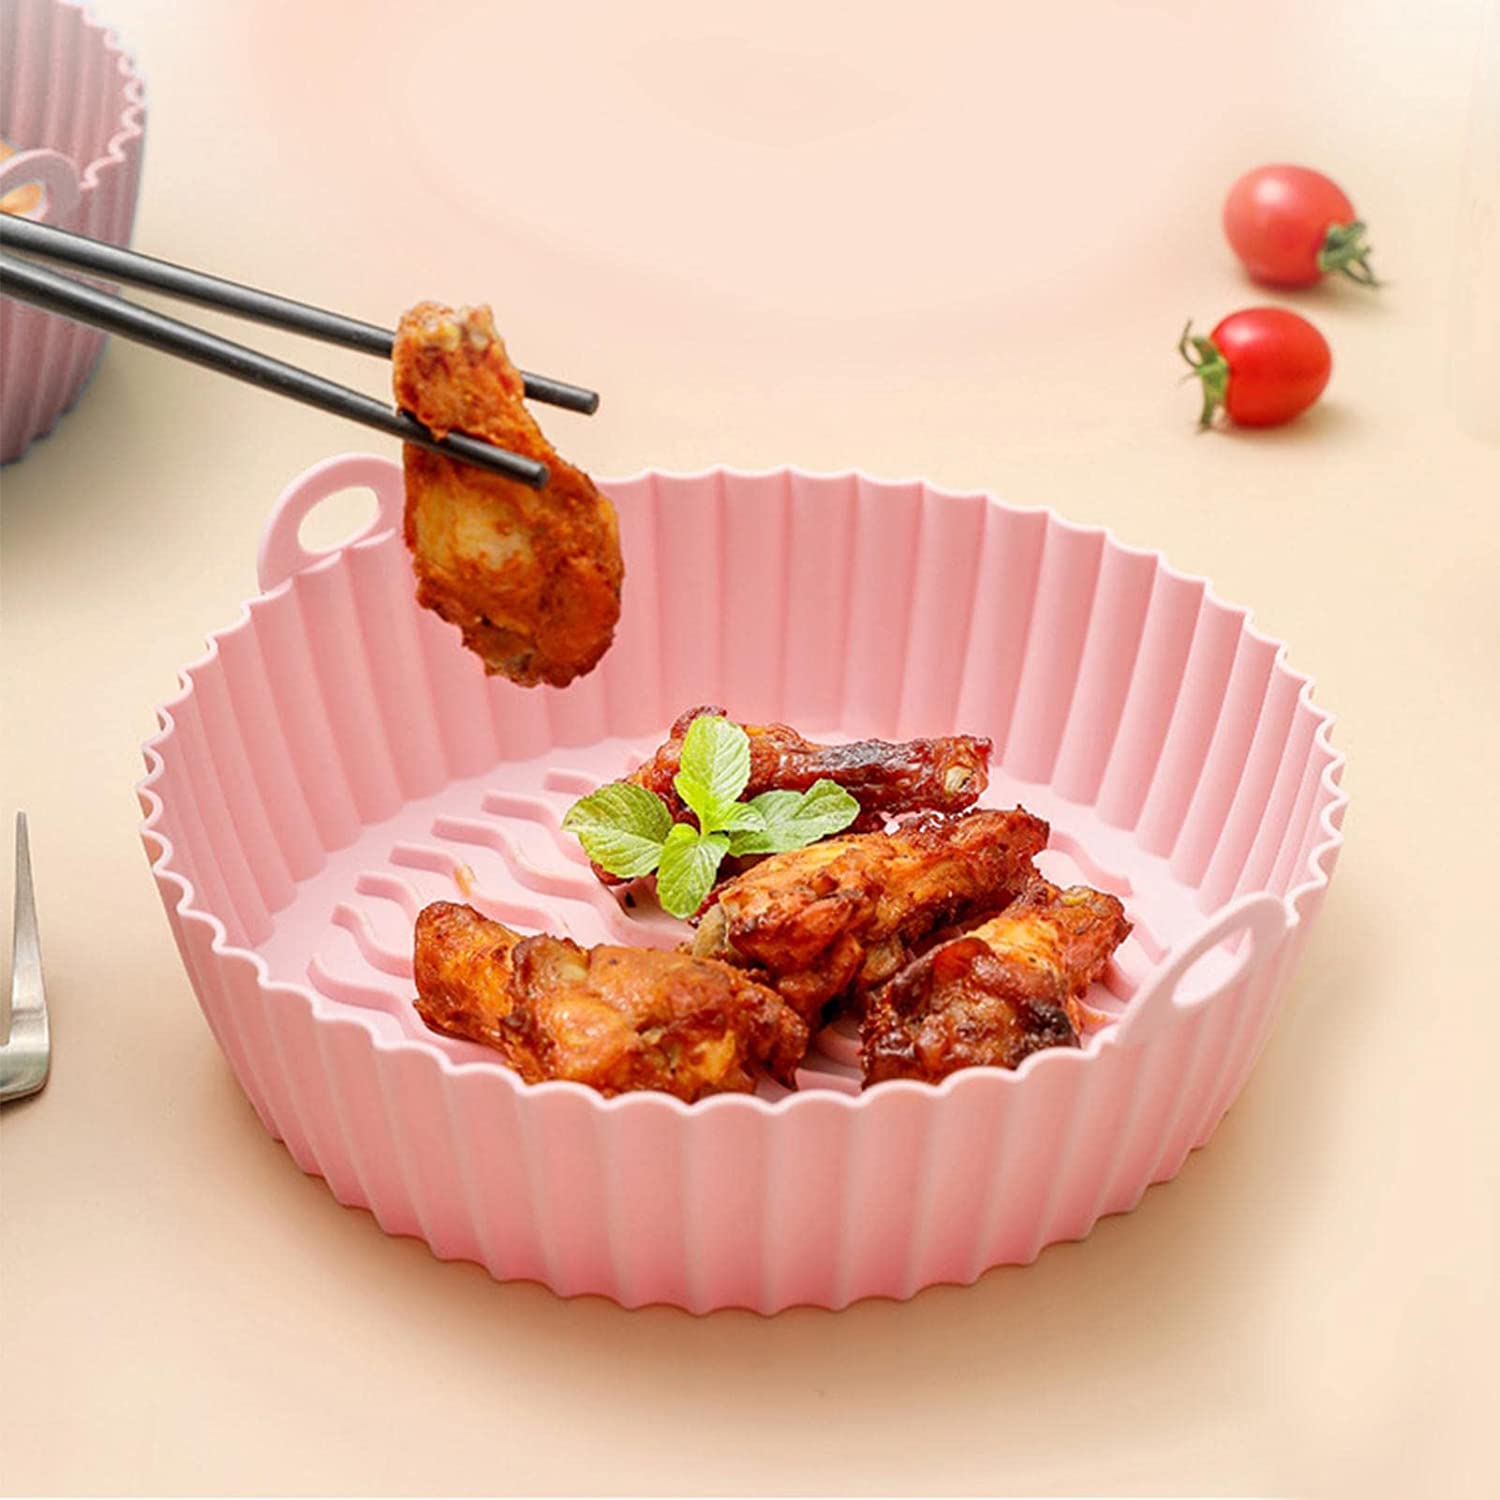 A pair of chopsticks holding pieces of chicken in a pink air fryer basket